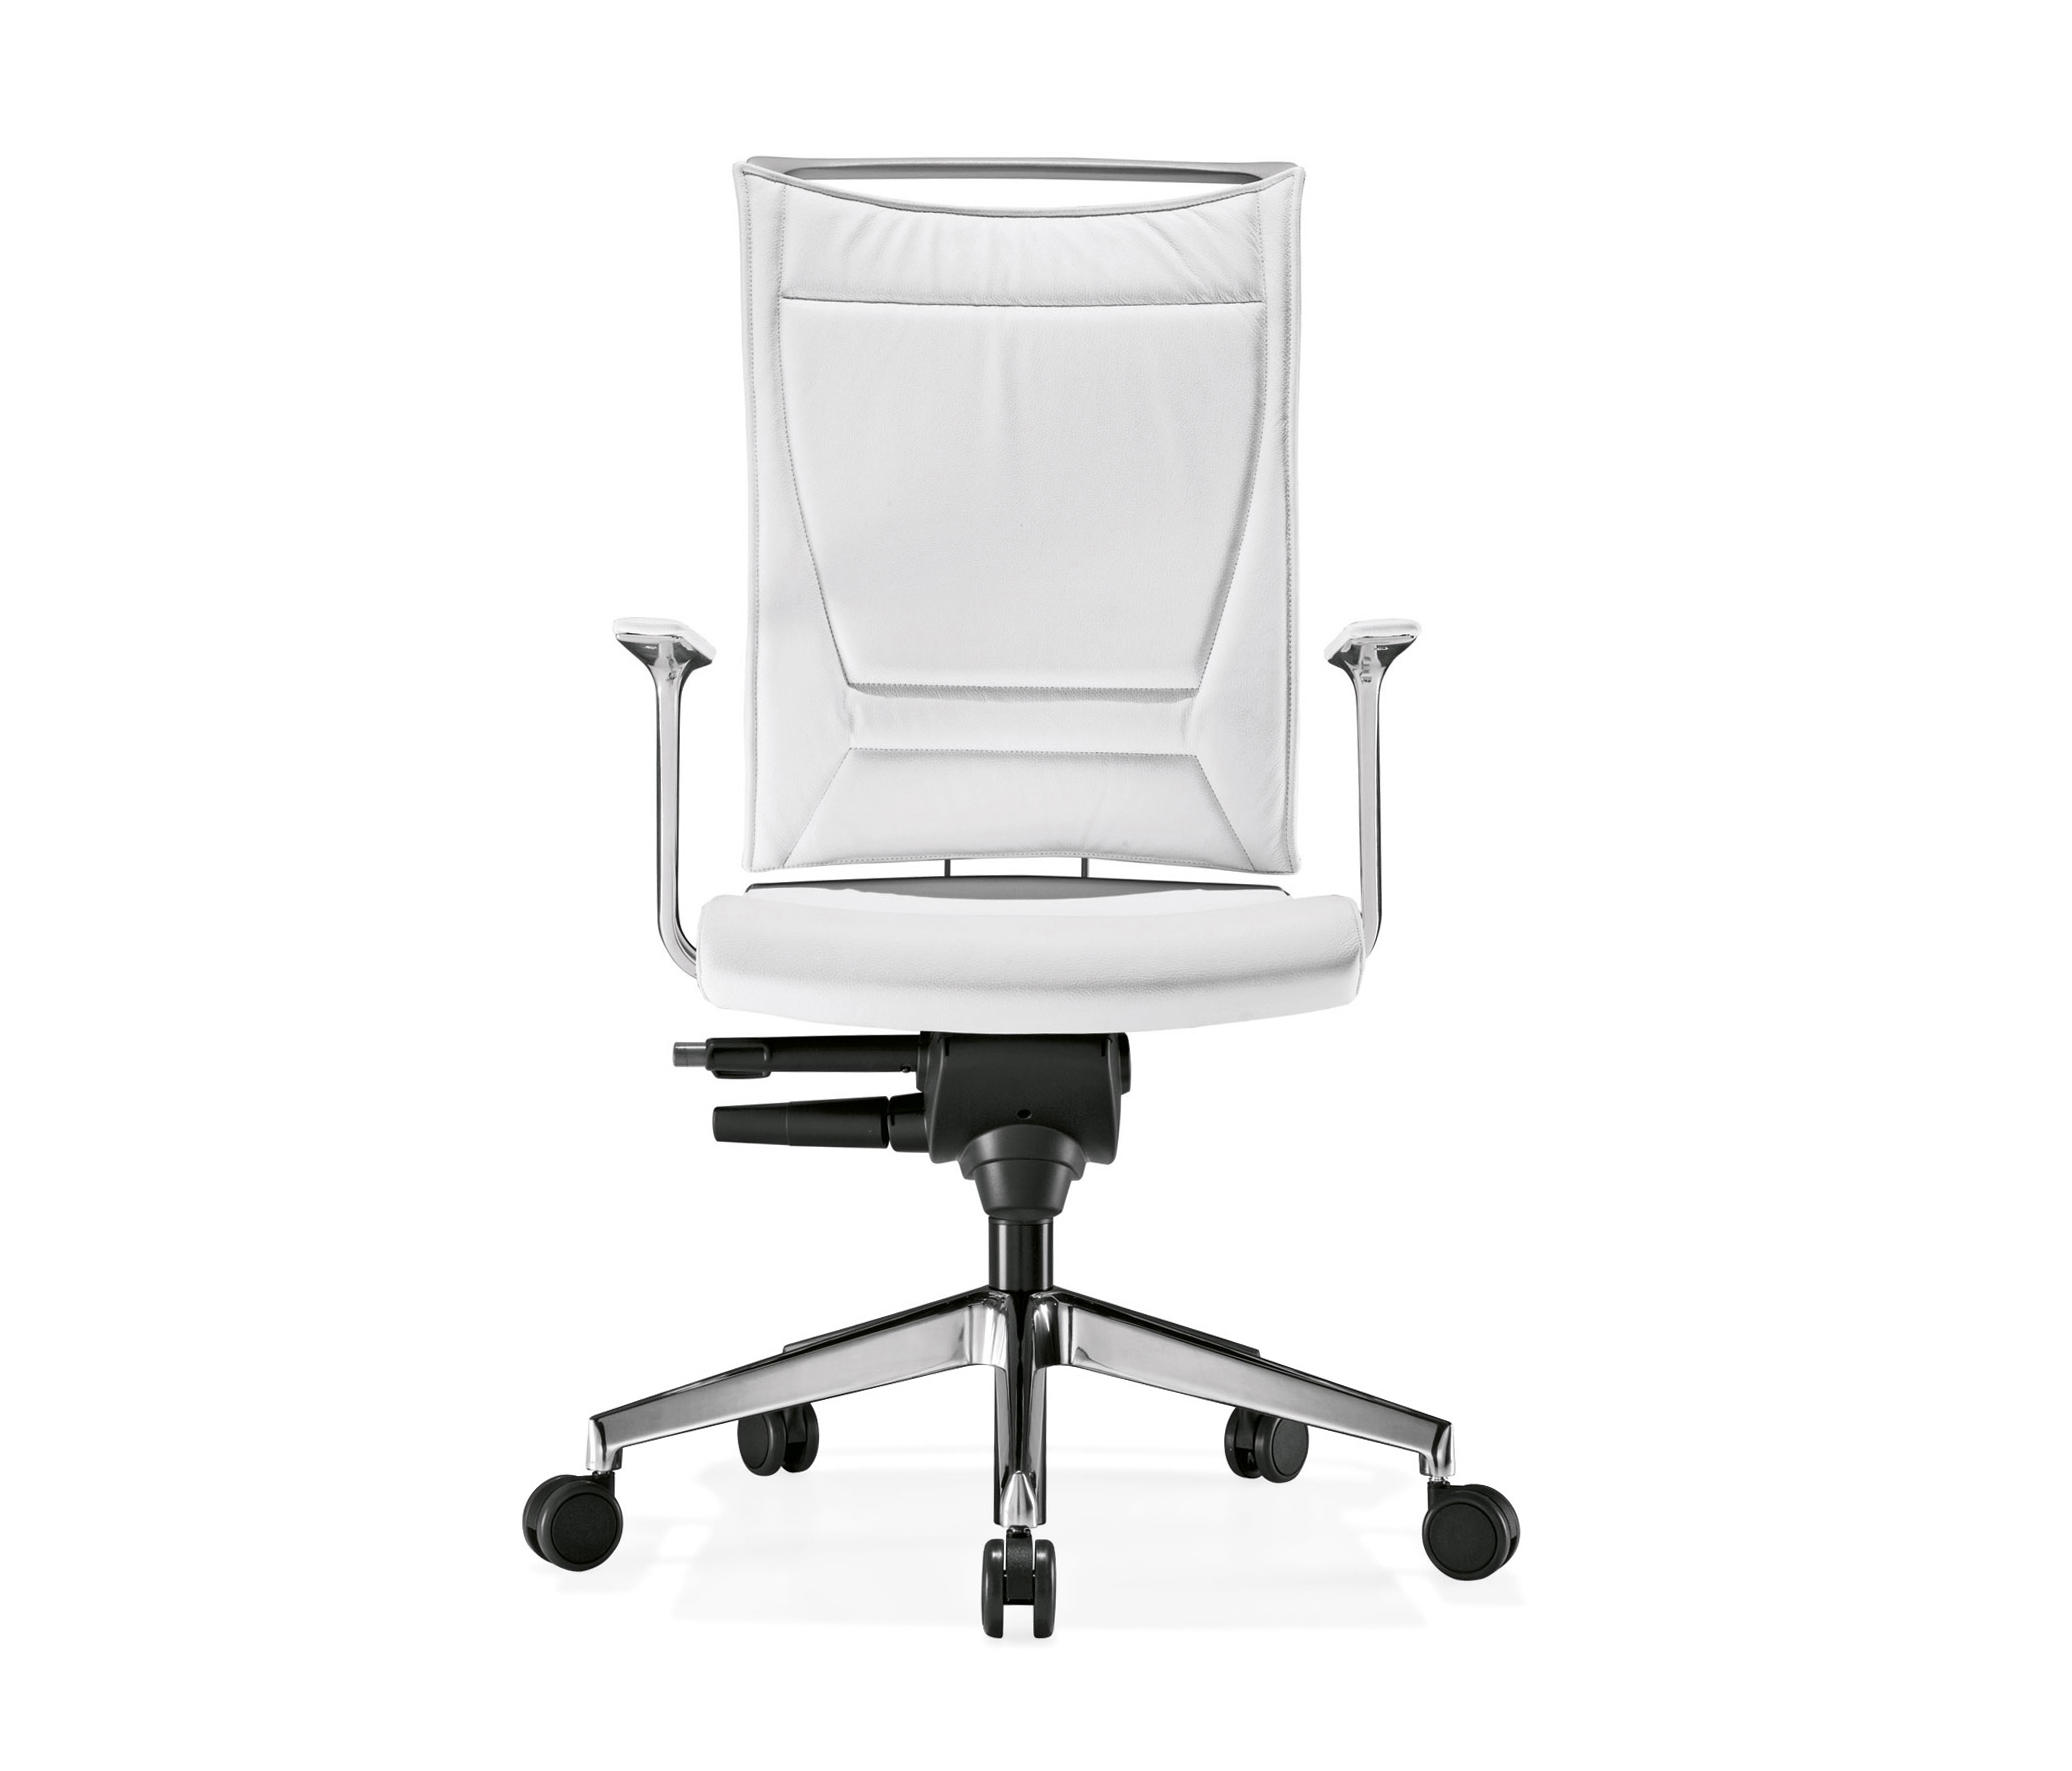 KORIUM - Office chairs from Kastel | Architonic